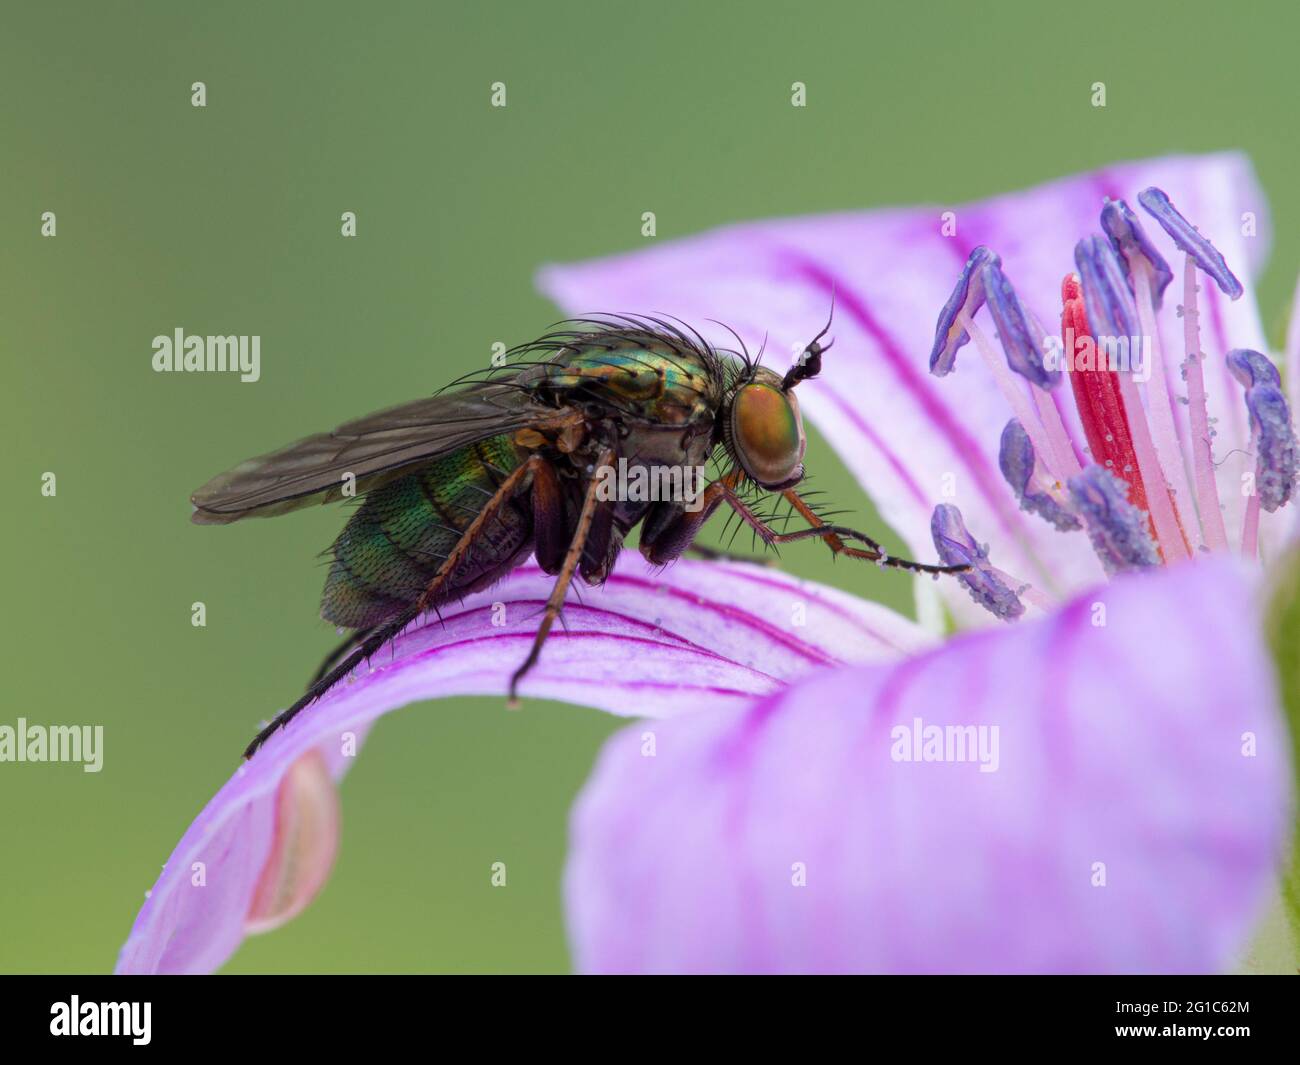 Side view of a beautiful long-legged fly, Dolichopodidae species, spotted with pollen, resting on the petal of a pink (hardy) Geranium flower Stock Photo